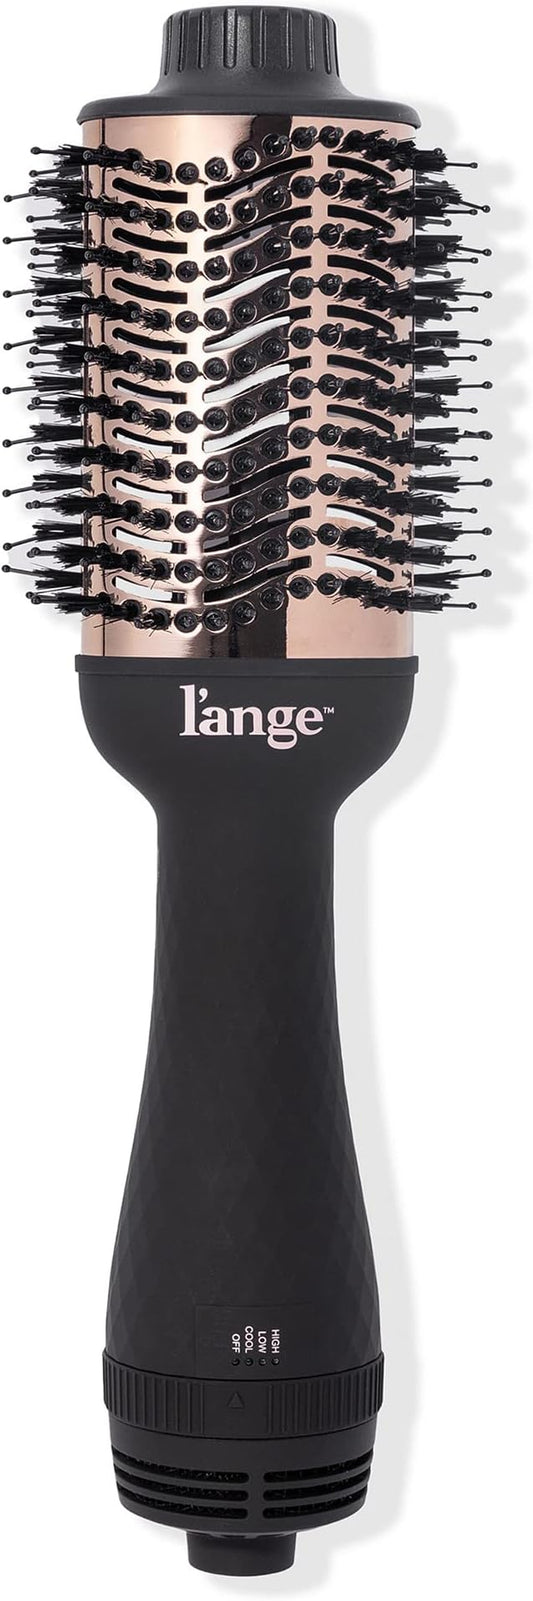 L'ANGE HAIR Le Volume 2-in-1 Titanium Blow Dryer Brush |  Hot Air Brush | Smooth, Frizz-Free Styling for All Hair Types - Black